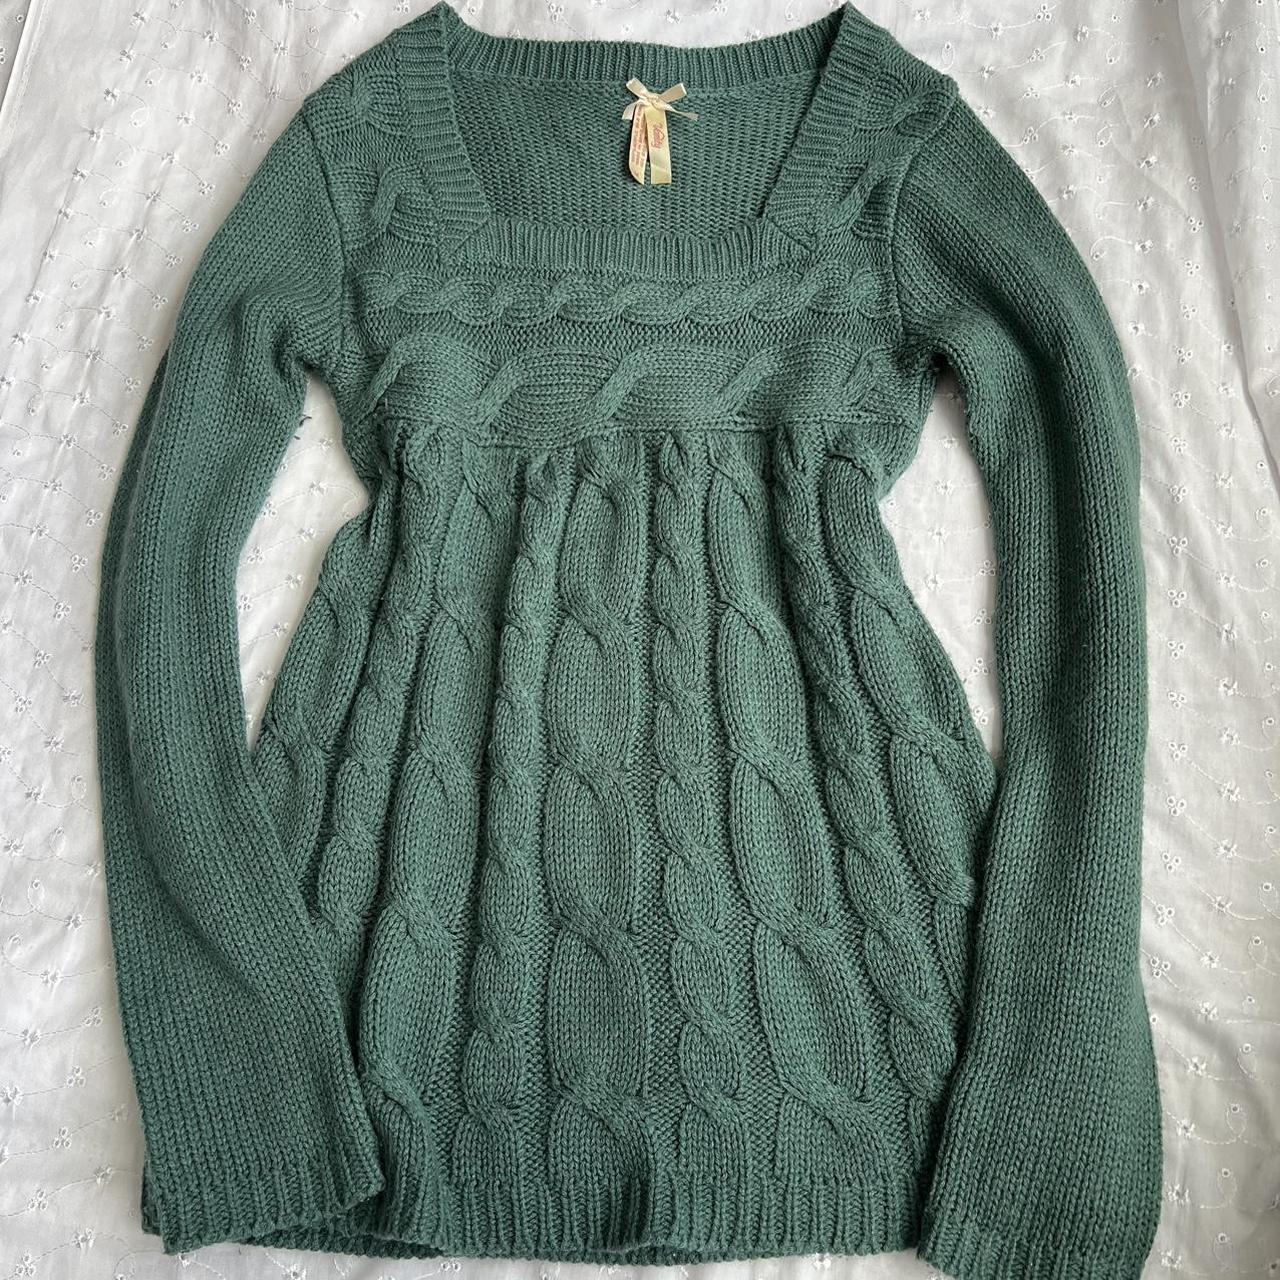 2000s babydoll sweater Pit to pit: 16 inches... - Depop